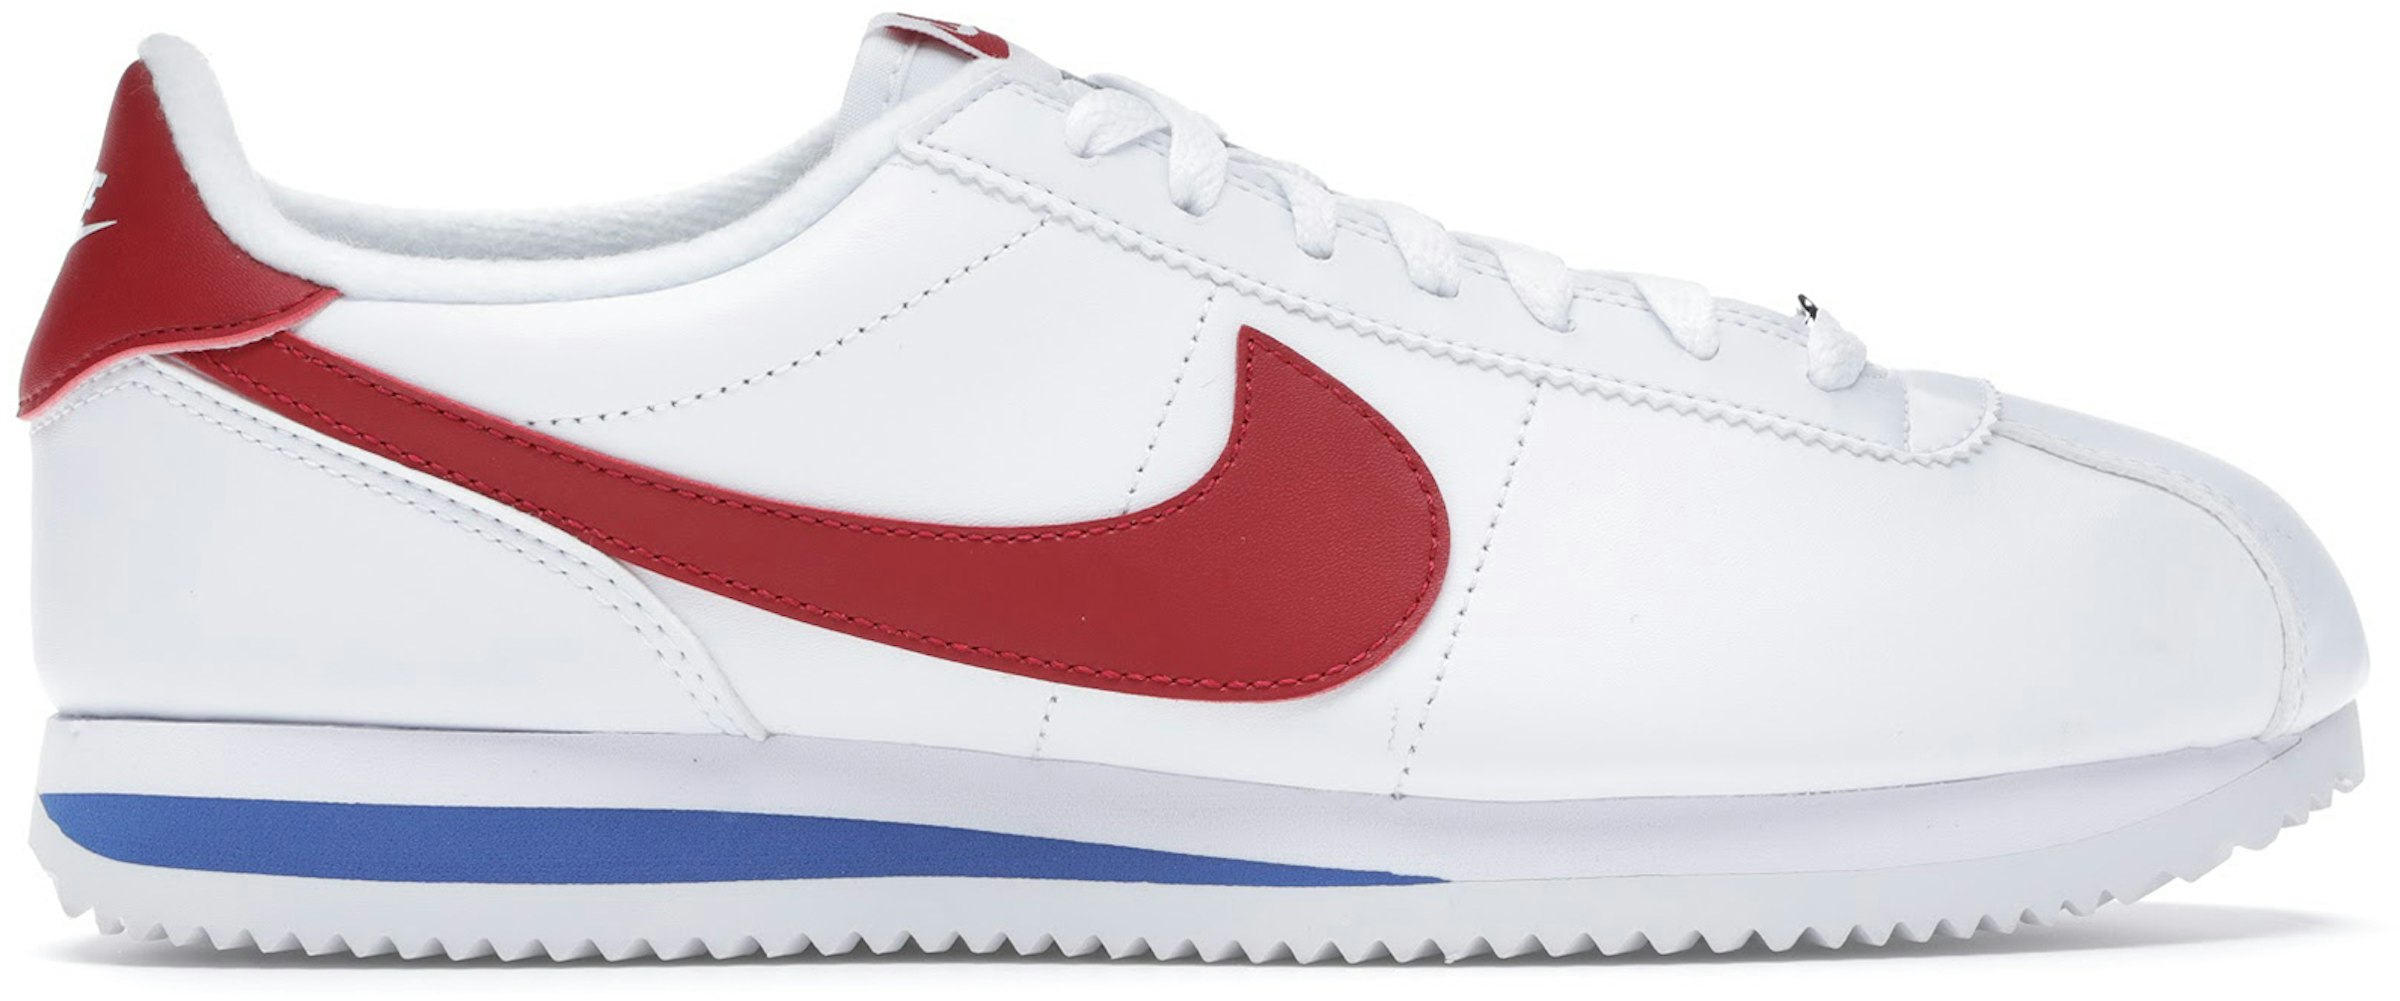 Buy Nike Cortez Size Shoes & New Sneakers - StockX